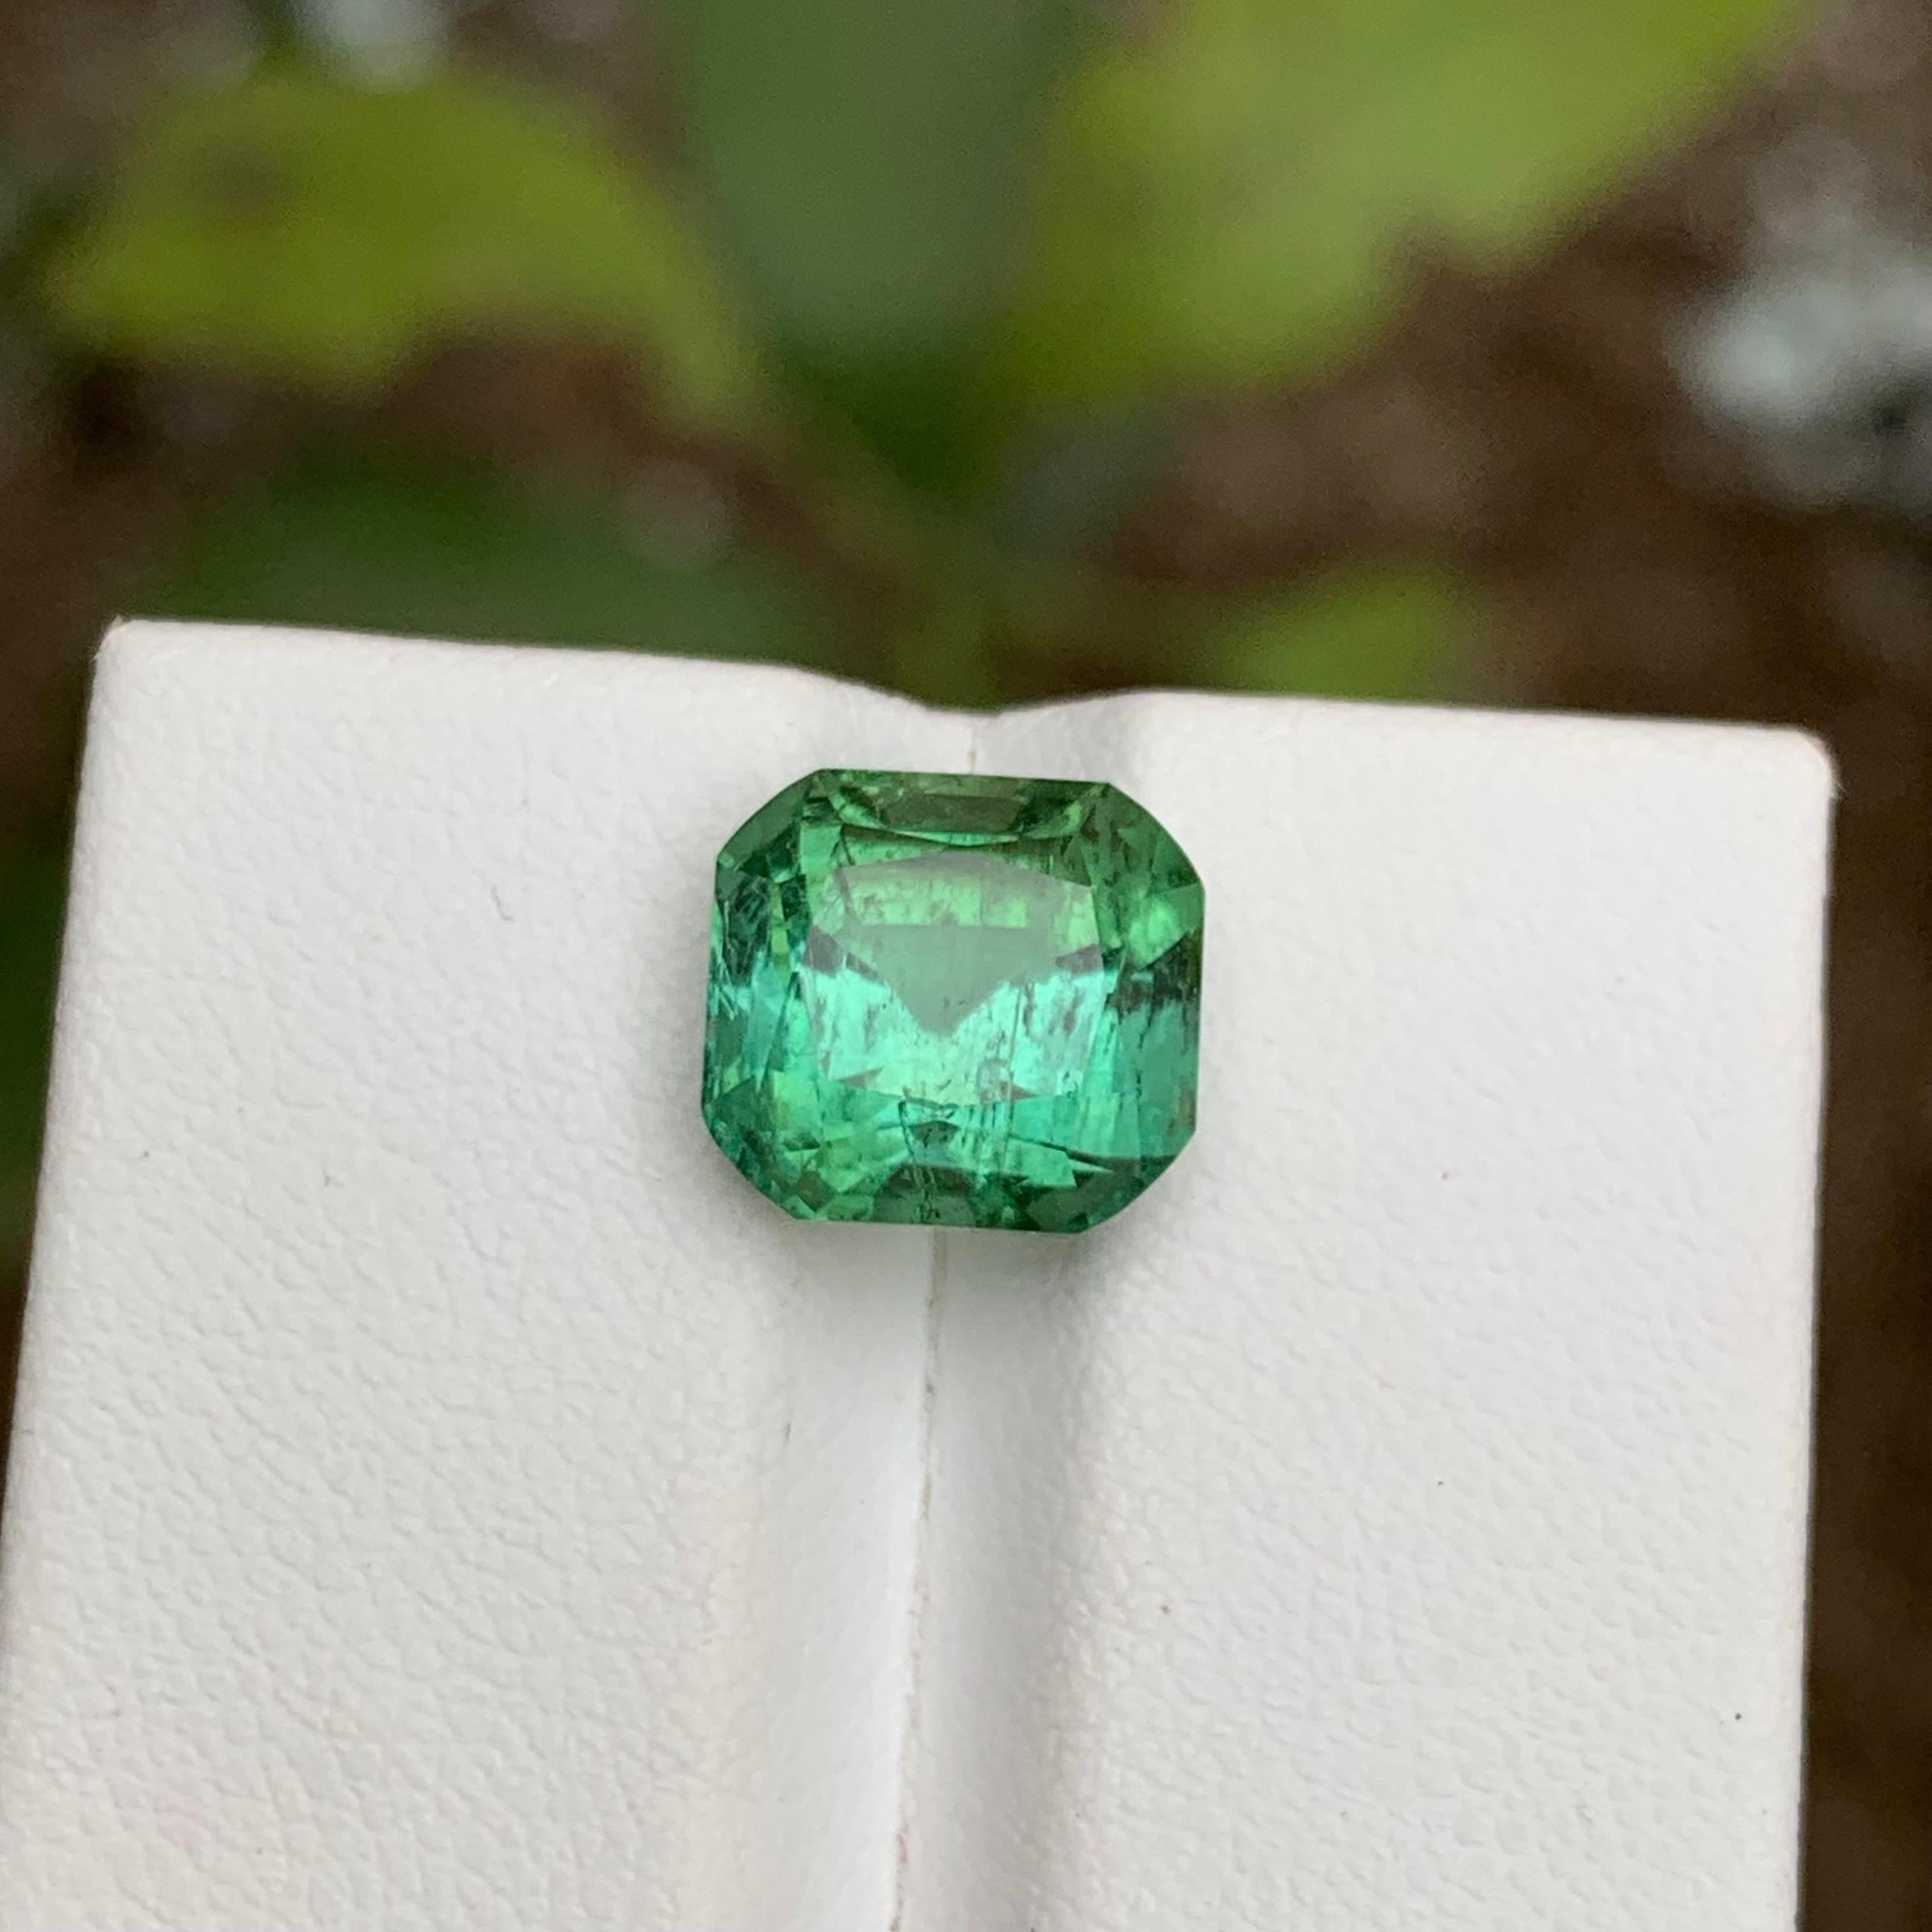 GEMSTONE TYPE: Tourmaline
PIECE(S): 1
WEIGHT: 5.05 Carats
SHAPE: Square Cushion 
SIZE (MM): 9.06 x 9.75 x 7.66
COLOR: Mint Green
CLARITY: Slightly Included II
TREATMENT: None
ORIGIN: Afghanistan
CERTIFICATE: On demand

Gorgeous 5.05 Carats Lagoon